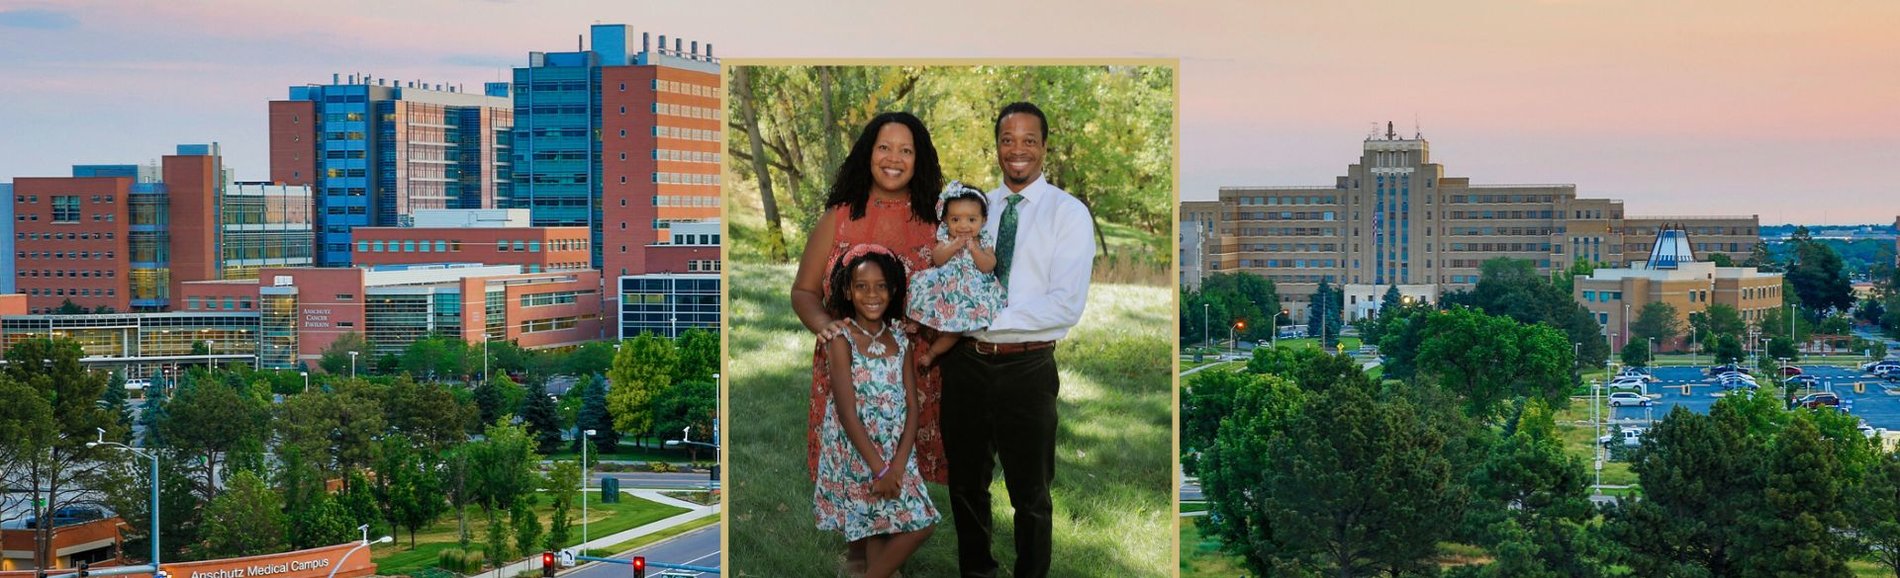 Brooke Dorsey Holliman family photo with husband and two daughters over a campus background